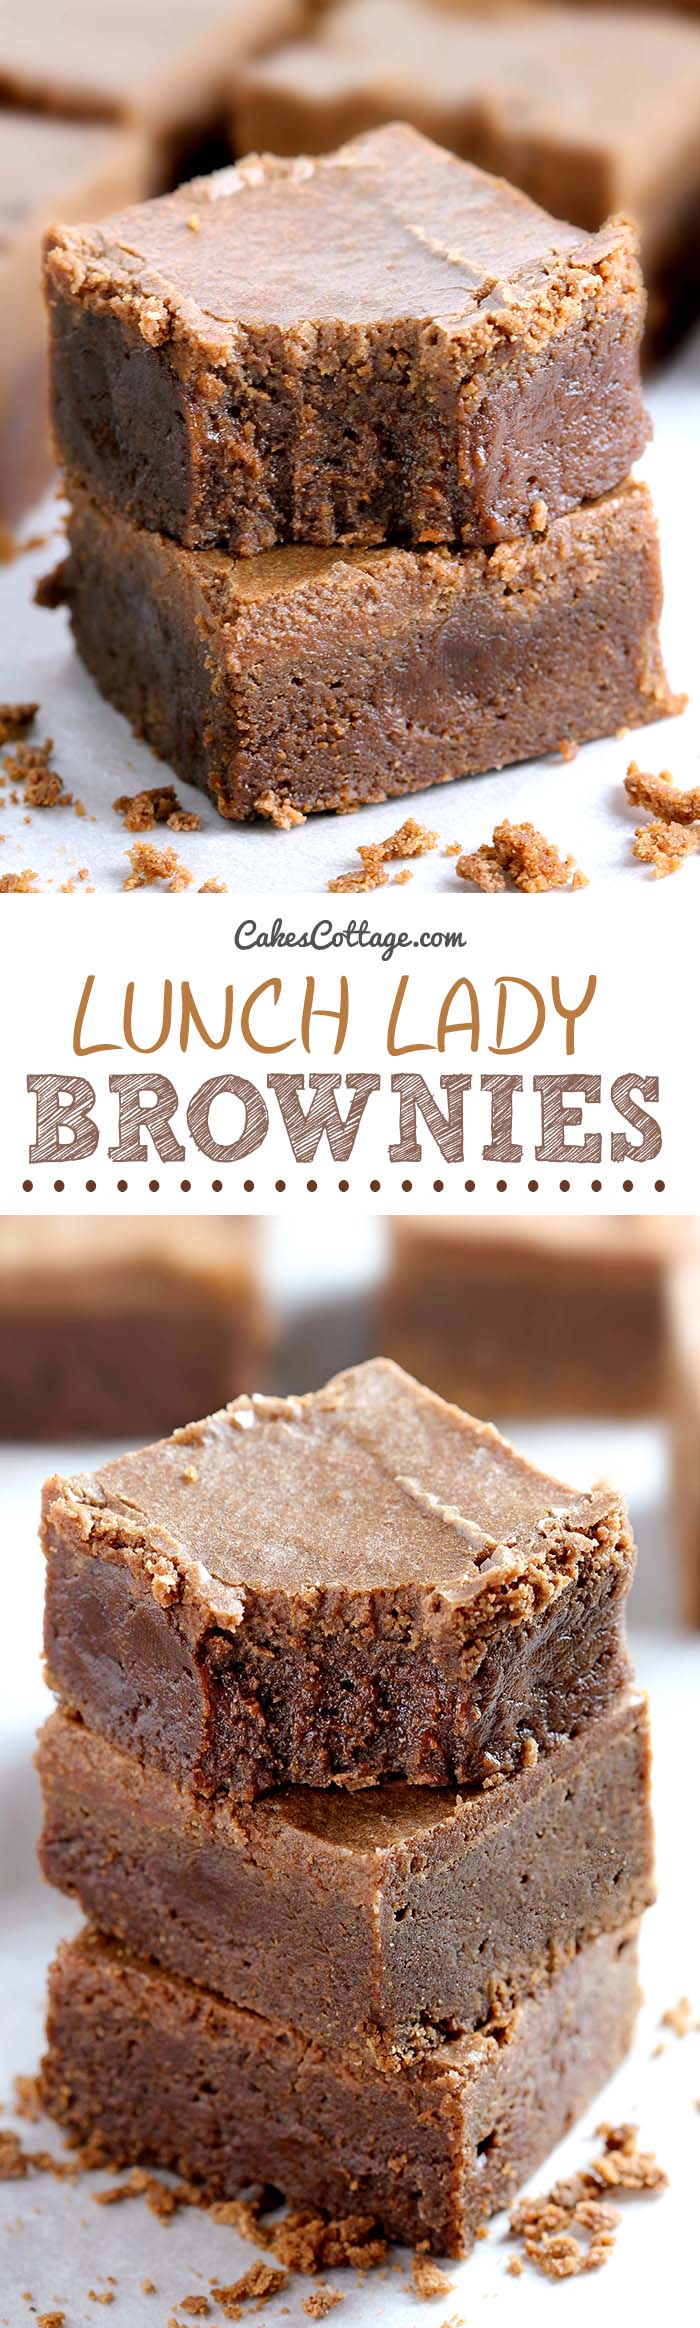 These Lunch Lady Brownies are chocolate lovers dream, perfectly rich, fudgy and full of chocolaty goodness. So if this if your preference, try this traditional brownie recipe!